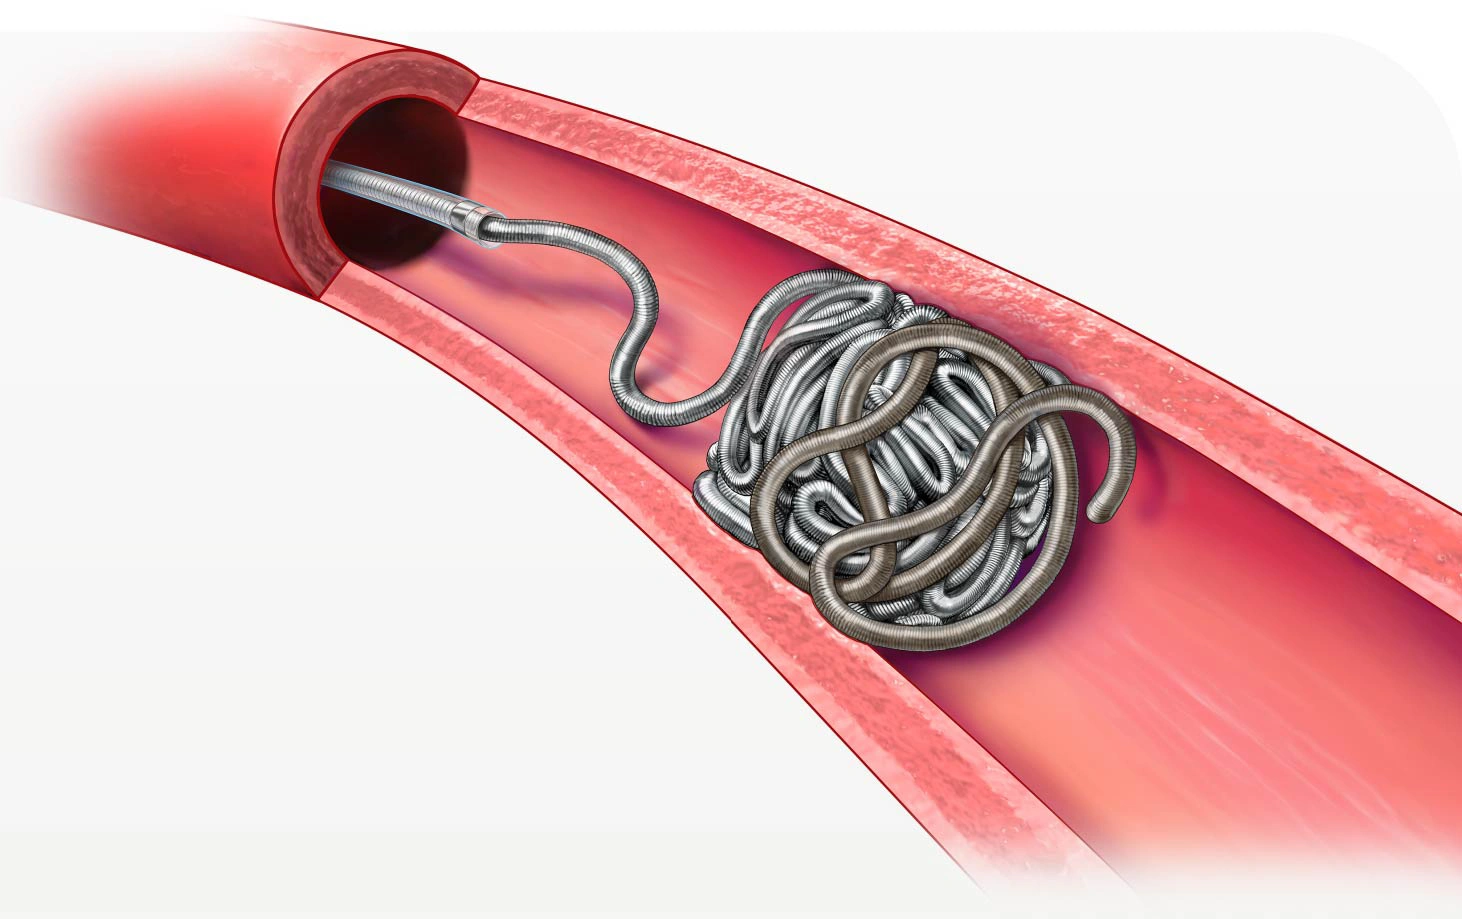 Illustration of POD embolization system packed and placed in a vessel within the body